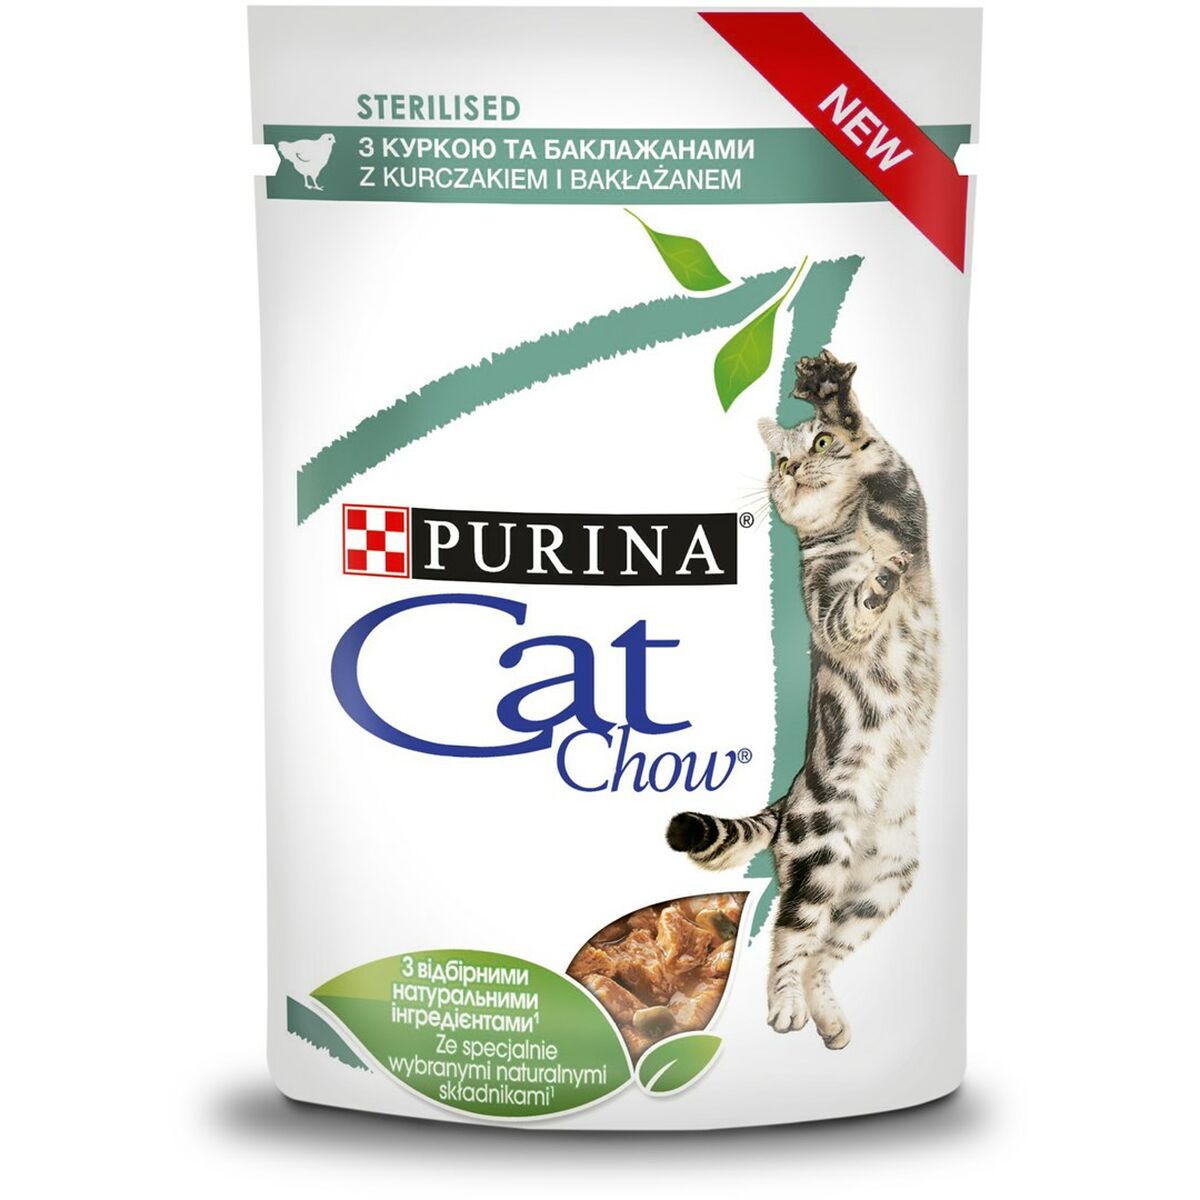 Aliments pour chat Purina Chow Sterlisied Gig Poulet